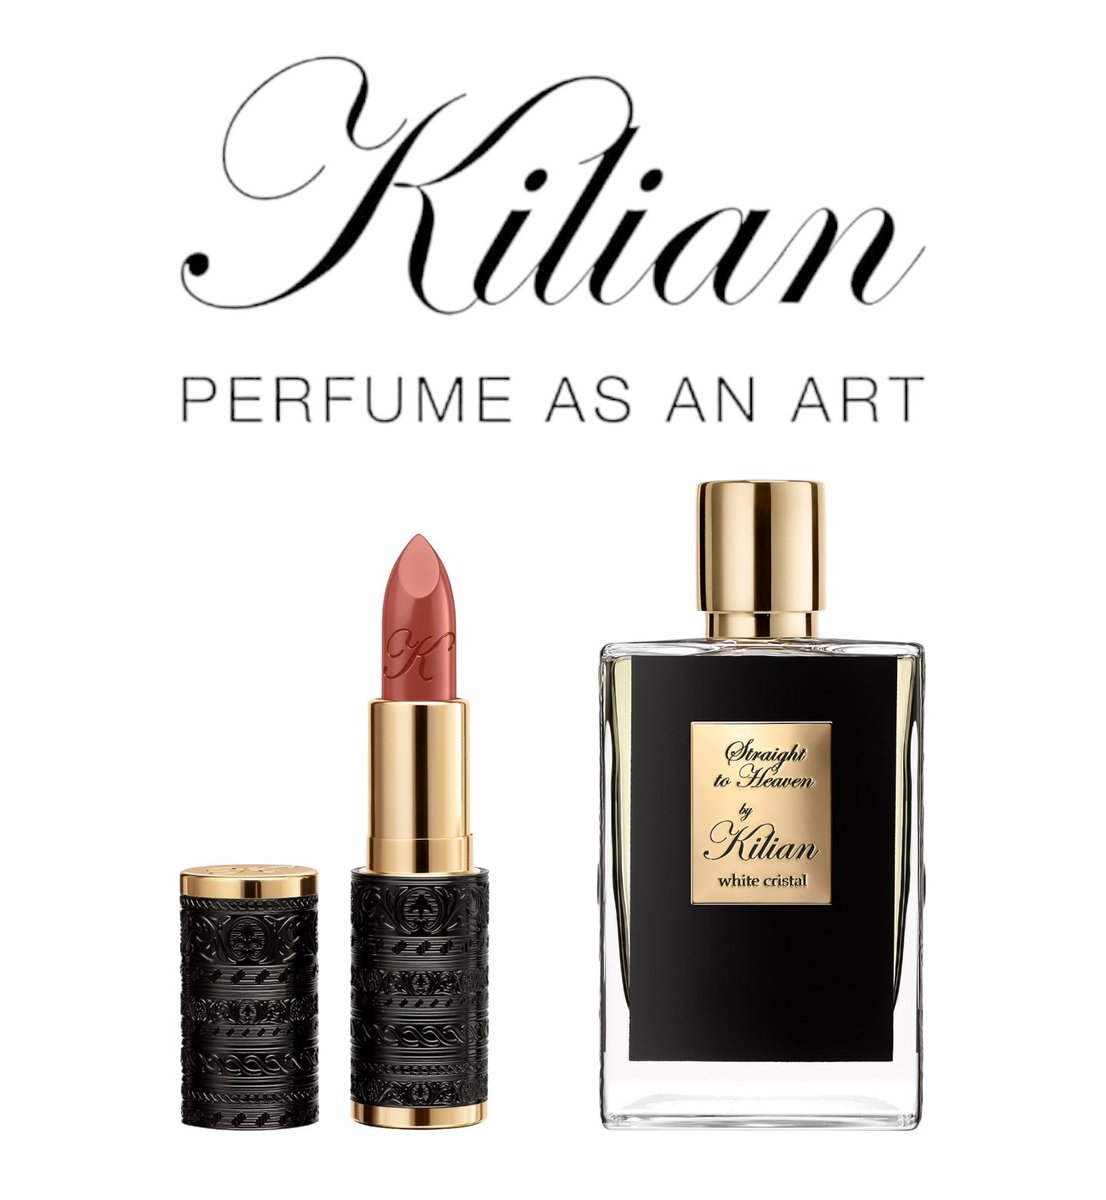 Kilian - Cosmetics company, owned by Estee Lauder.

Kilian is owned by Estee Lauder, who's ownership, especially Ronald Lauder, has extremist zionist views and financially and politically supports Israeli occupation of Palestinian land.

#FreePalestine #BoycottIsrael